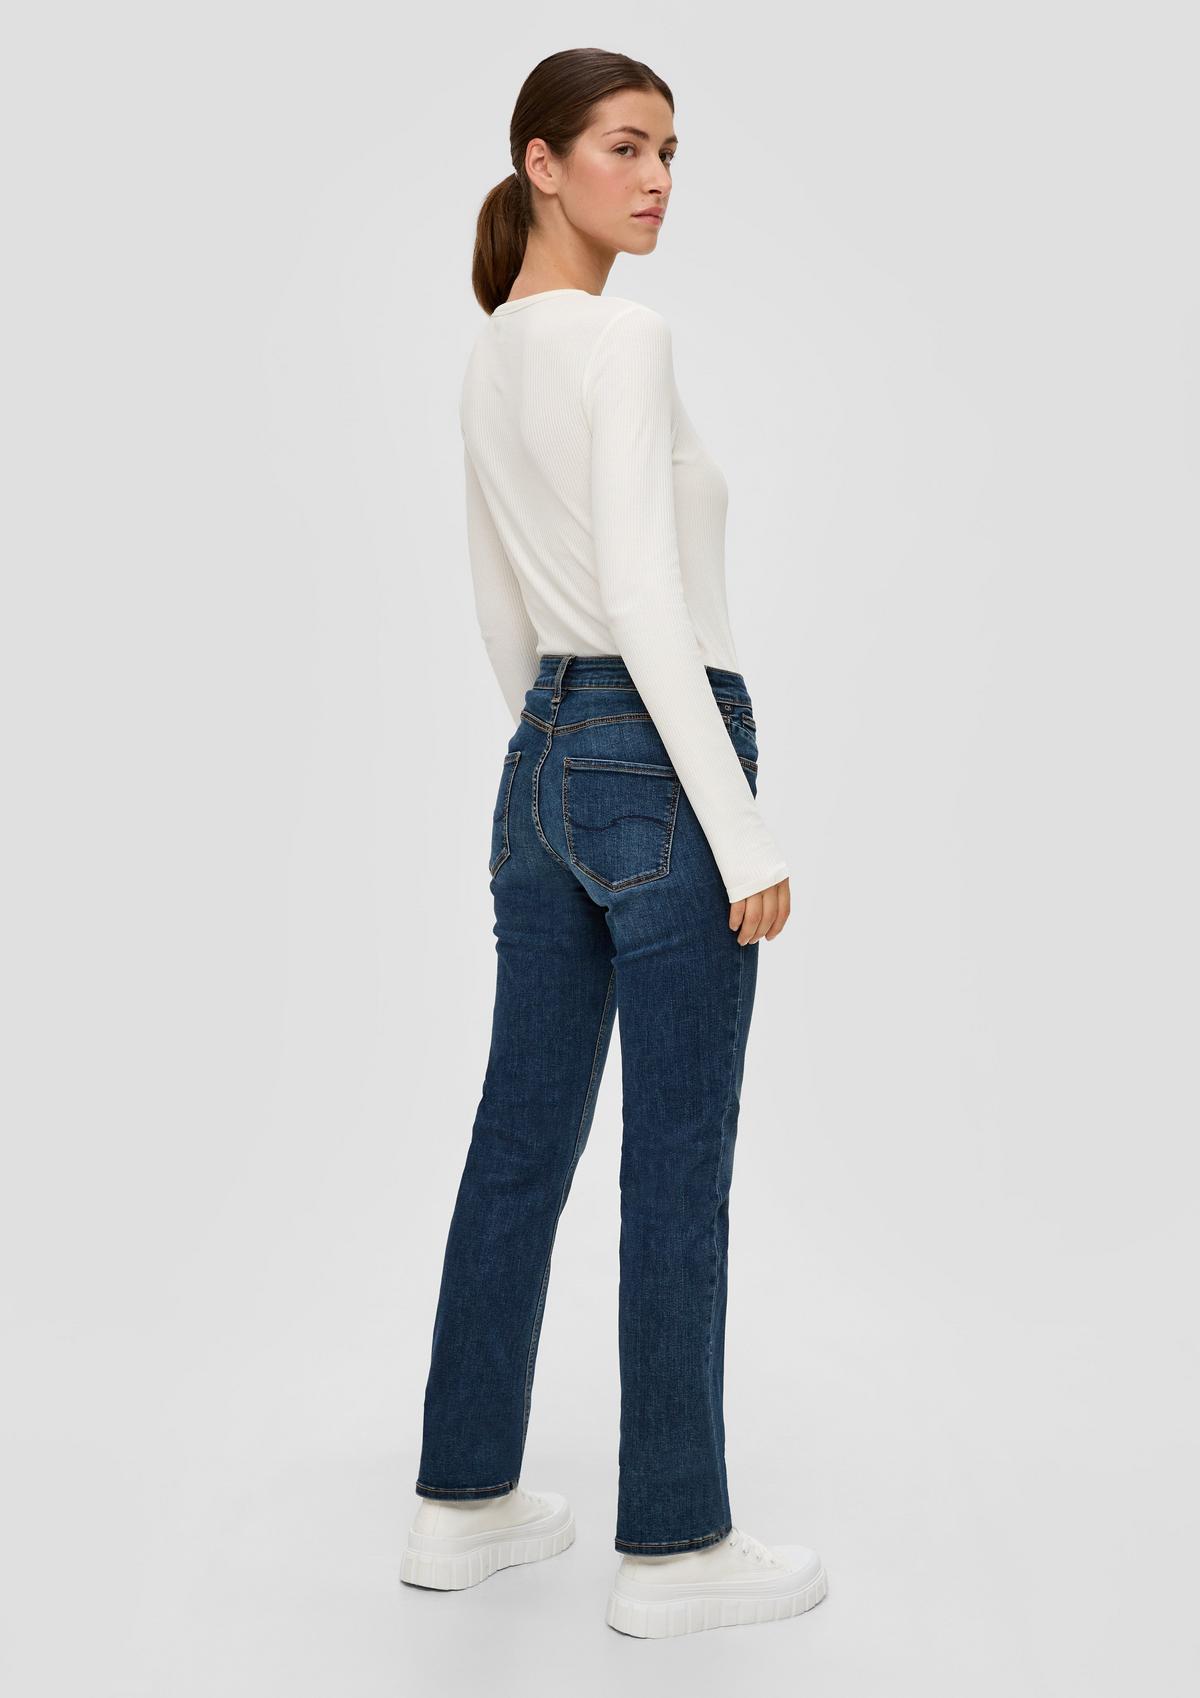 s.Oliver Catie jeans / slim fit / mid rise / straight leg